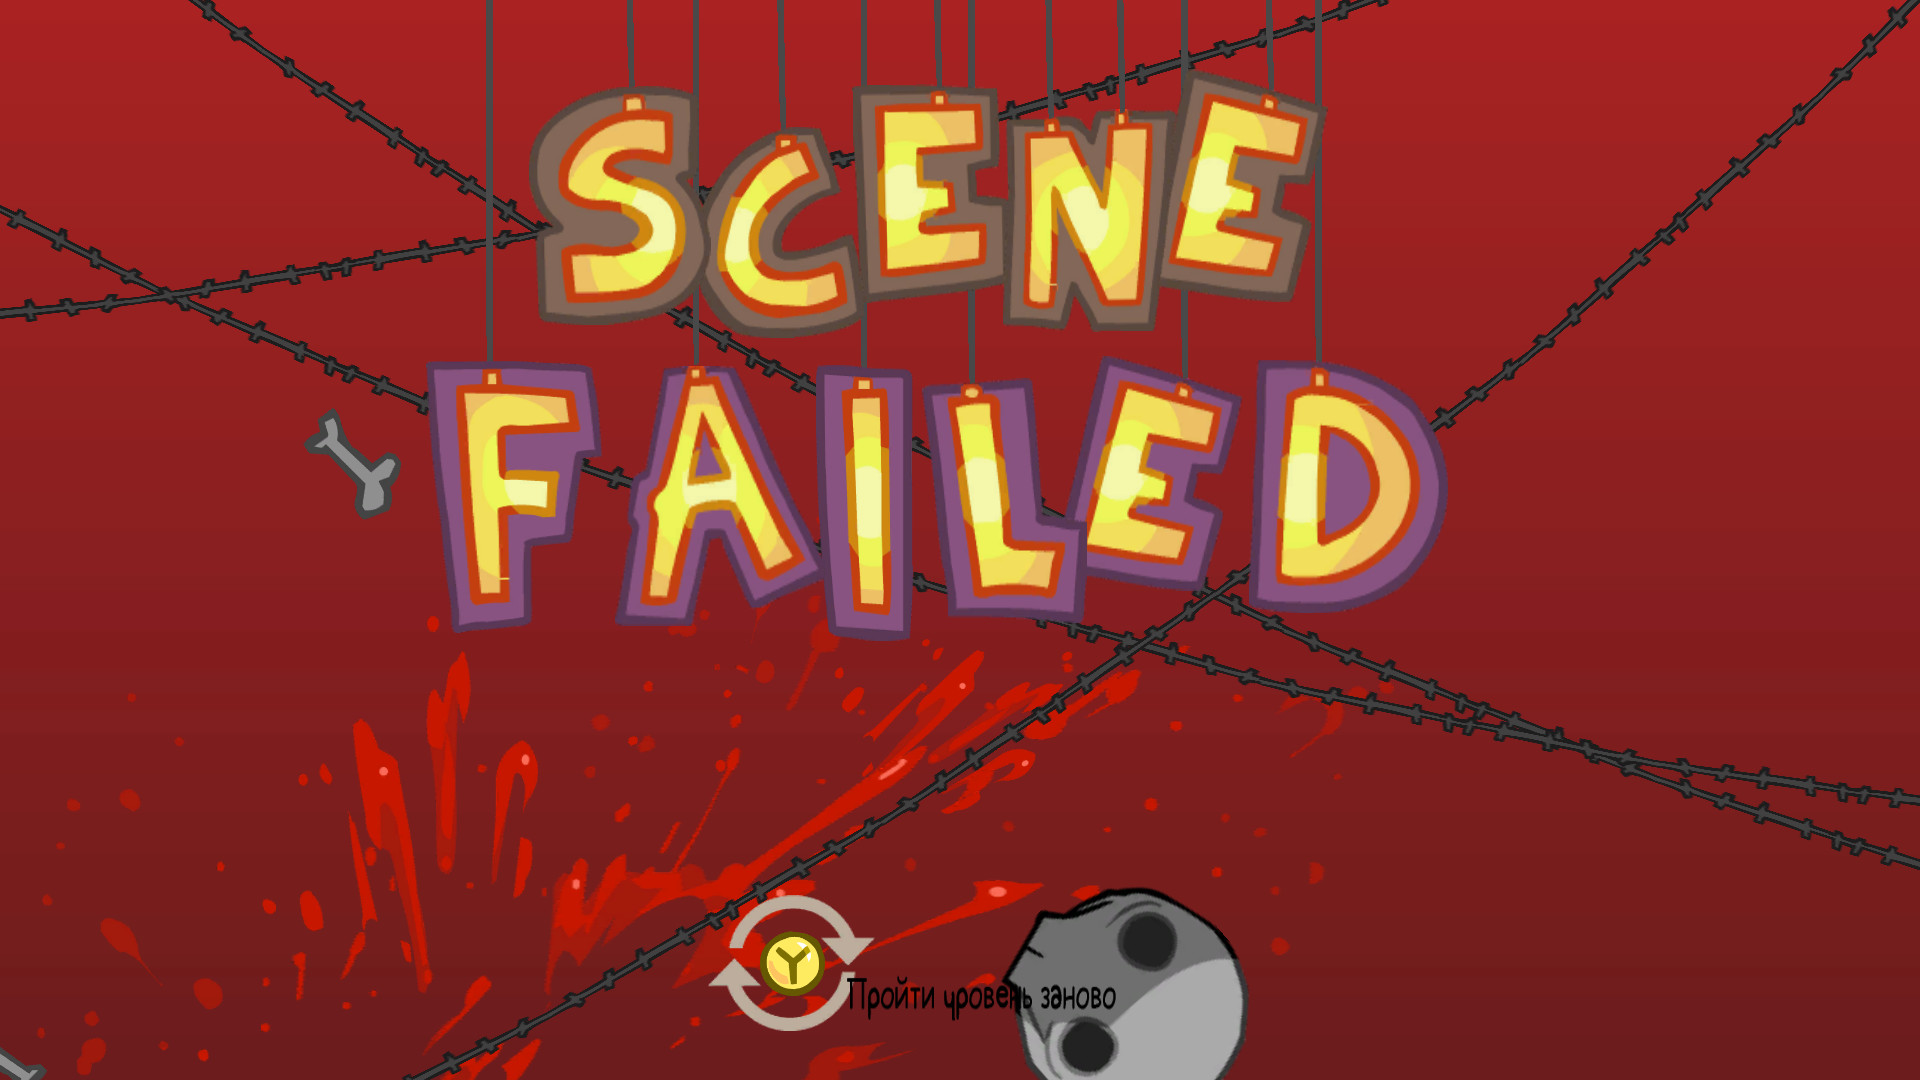 BattleBlock Theater Windows Scene failed only shown after failing timed levels